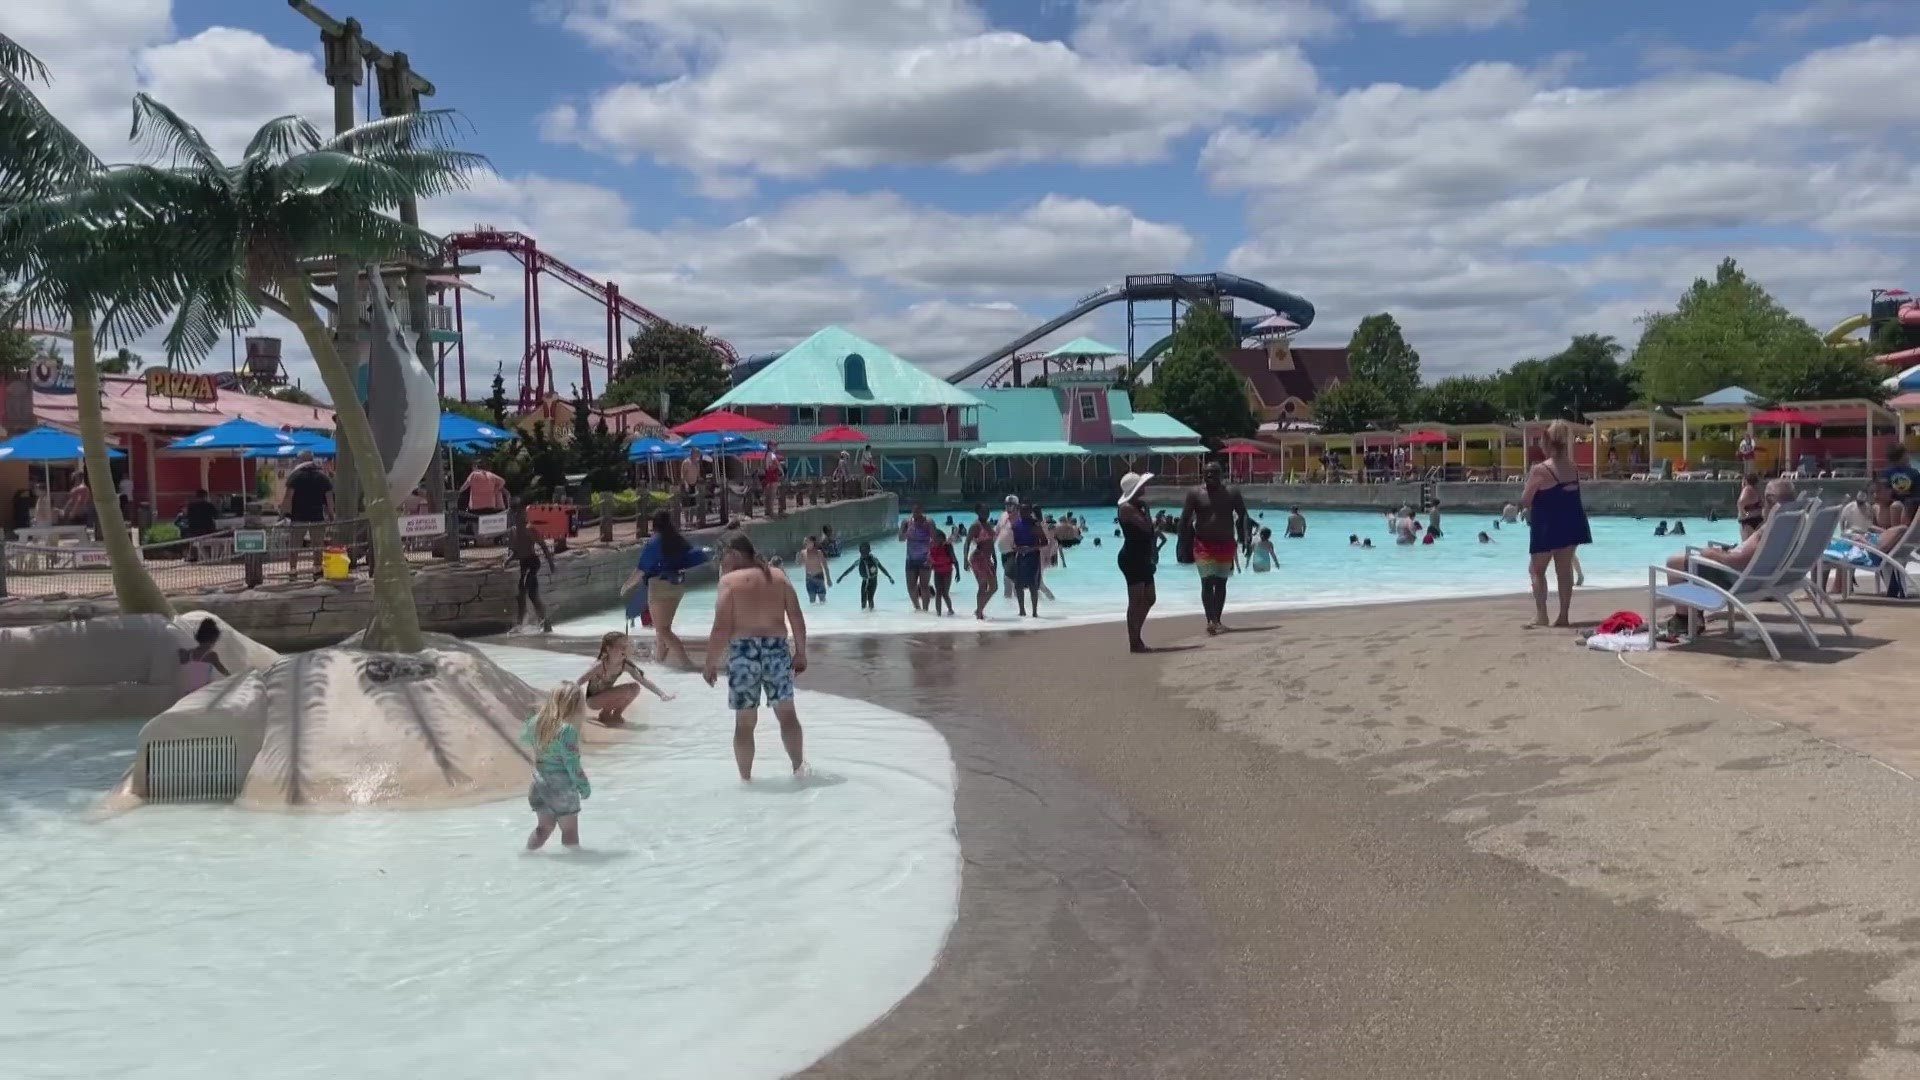 Throughout the week, the theme park has been prepping it's pools in Hurricane Bay, just in time for Memorial Day weekend.